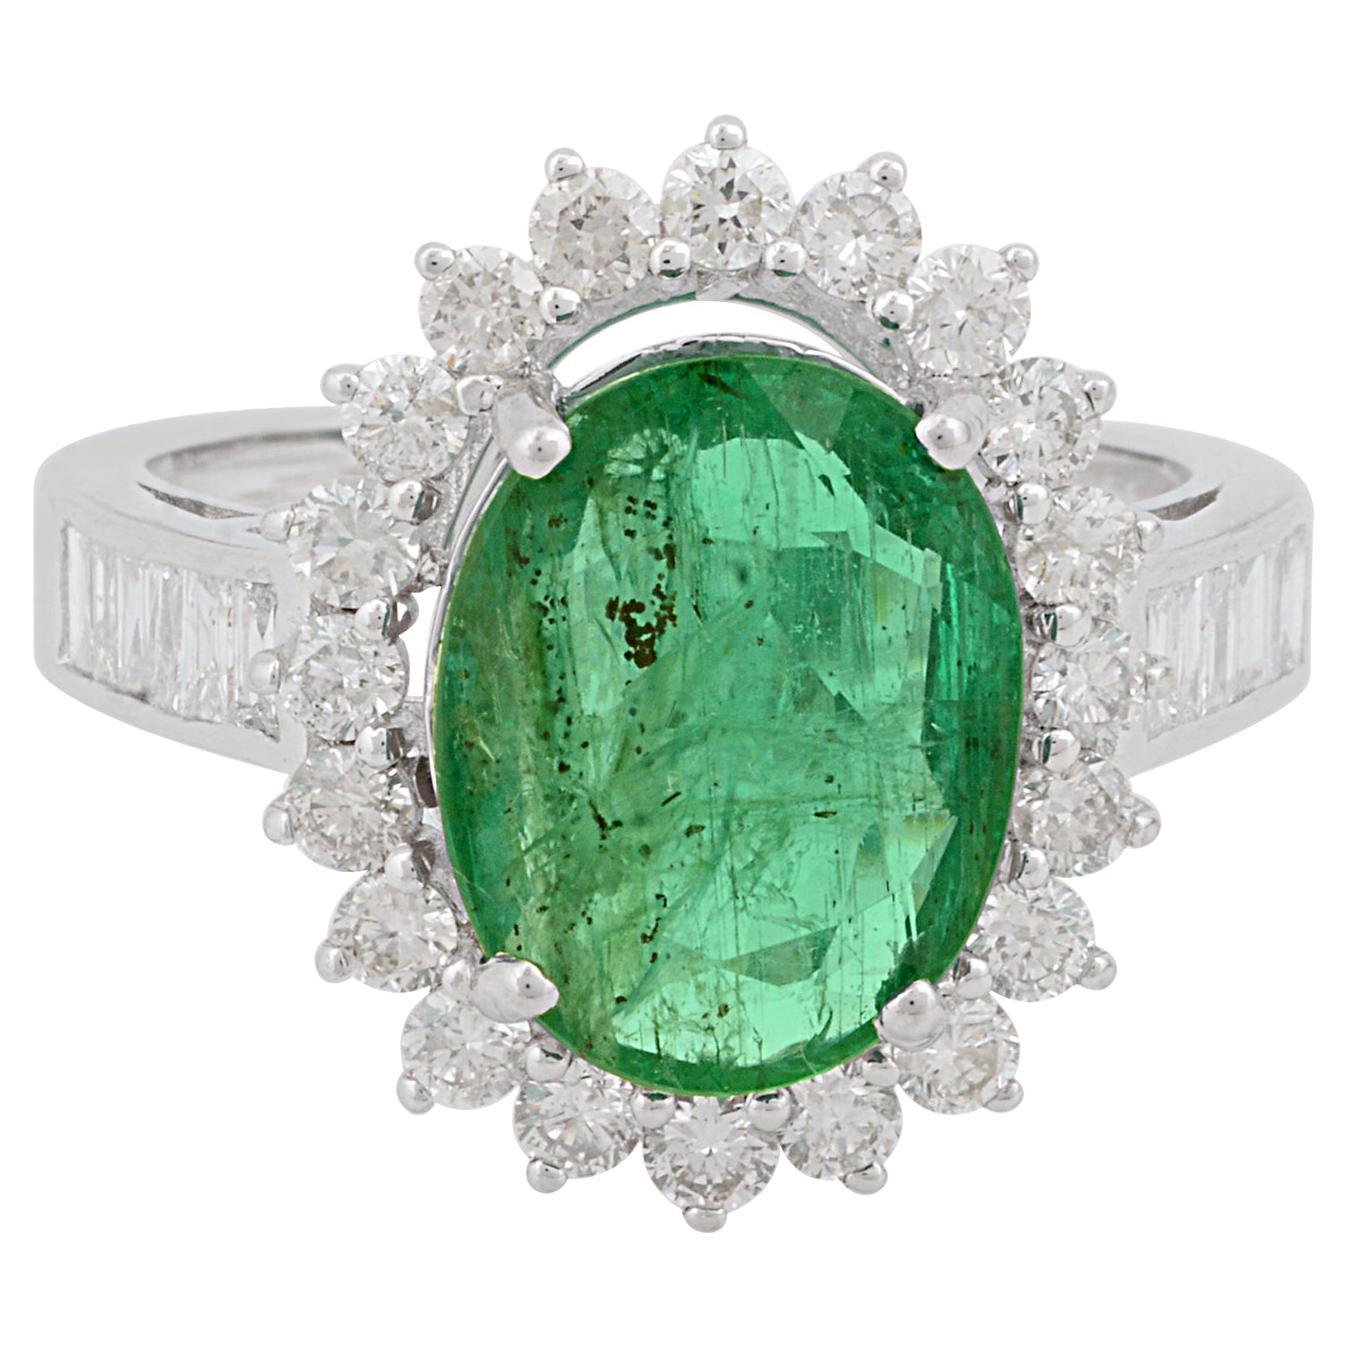 For Sale:  Oval Natural Emerald Gemstone Cocktail Ring Diamond 10 Karat White Gold Jewelry